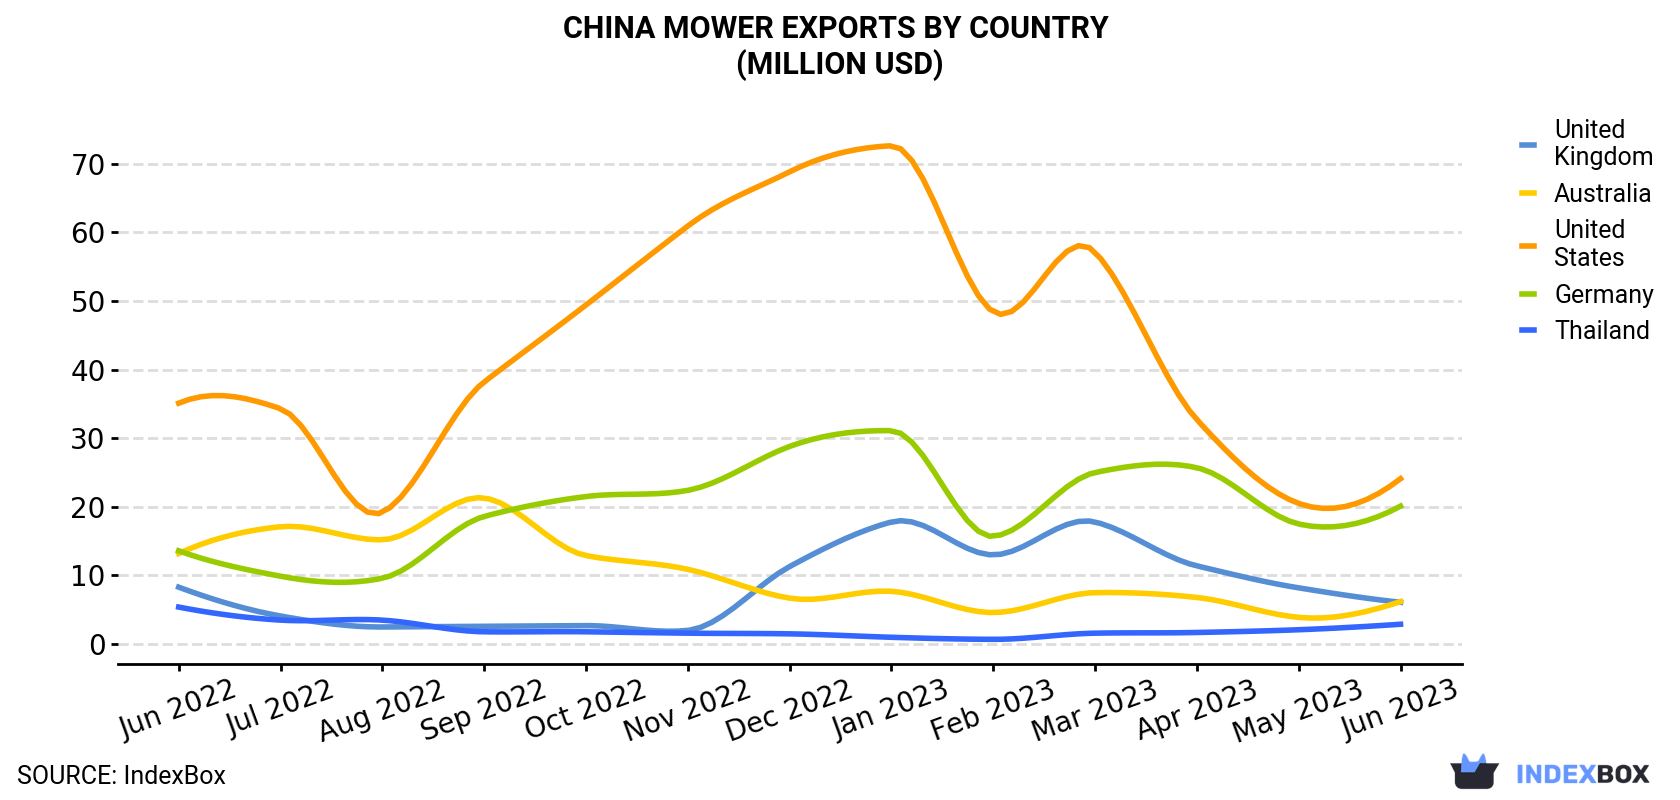 China Mower Exports By Country (Million USD)